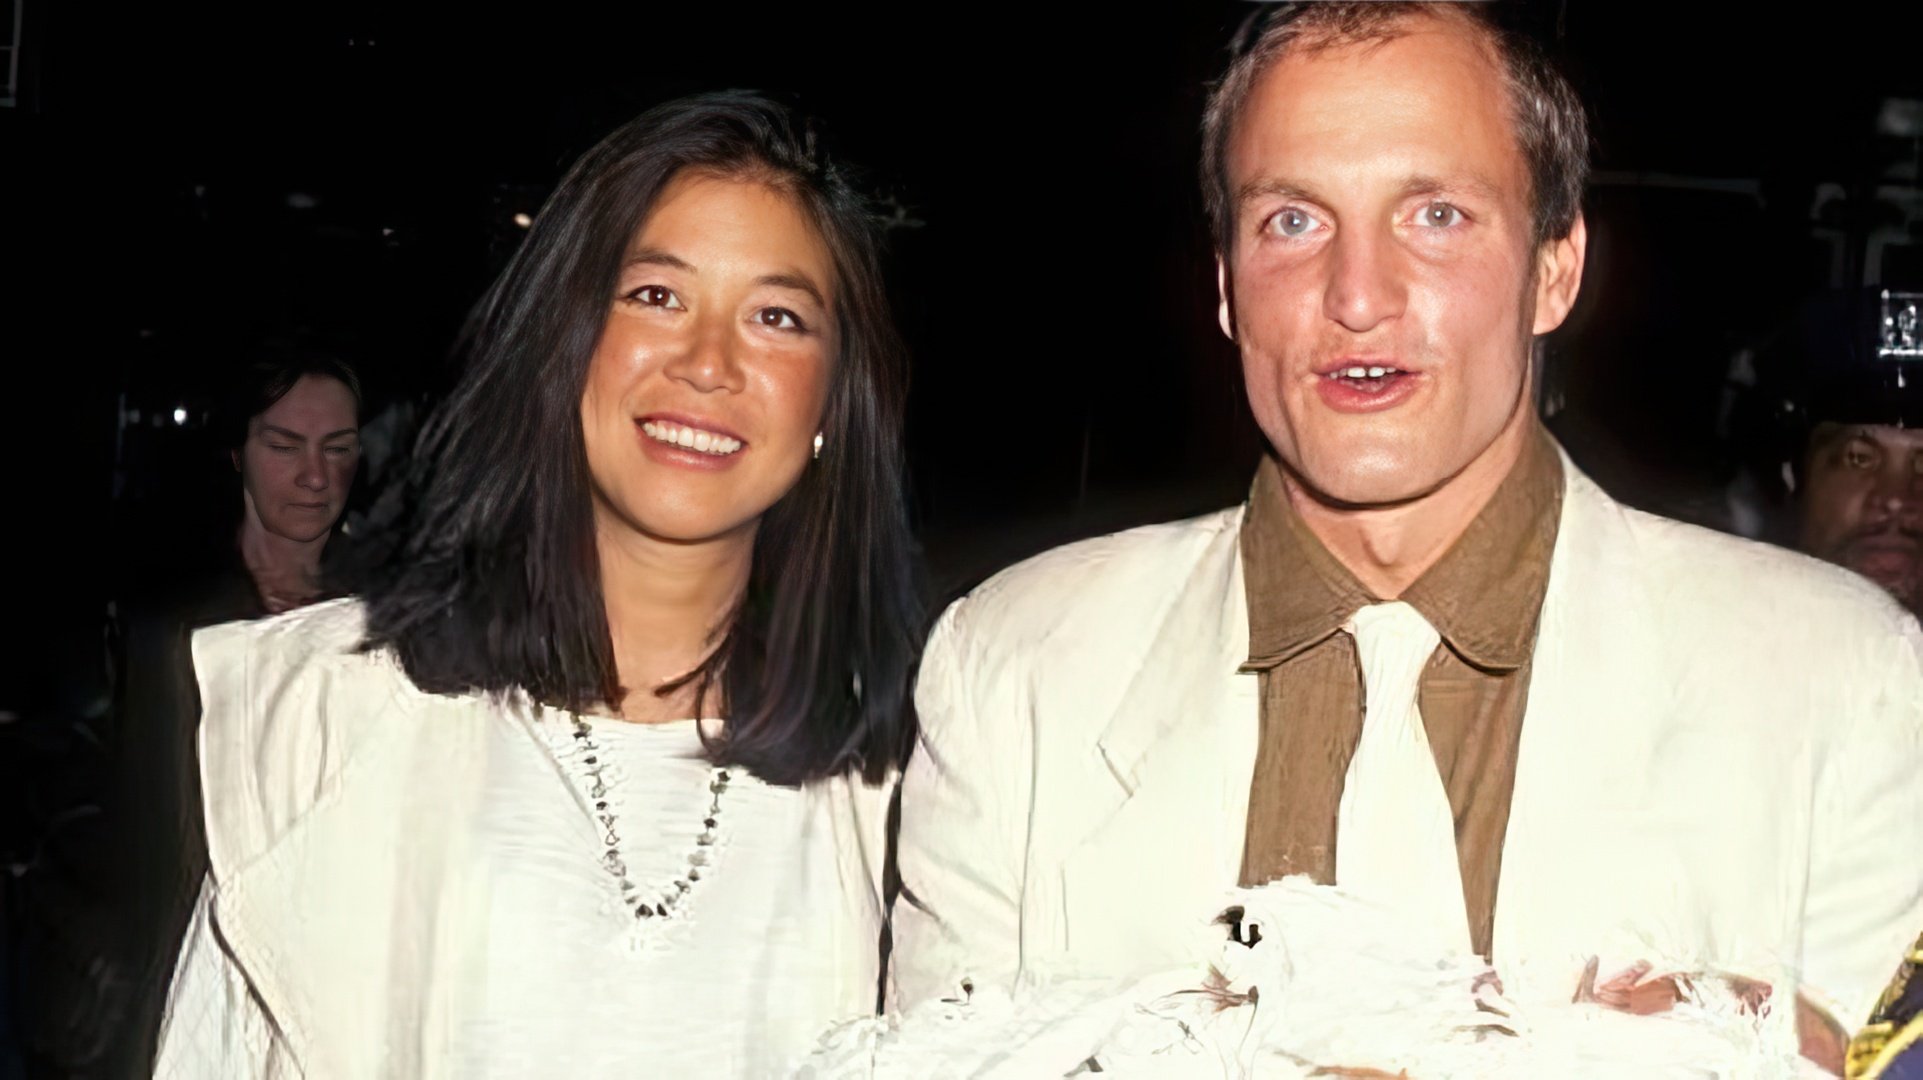 Woody Harrelson and Laura Louie in their youth